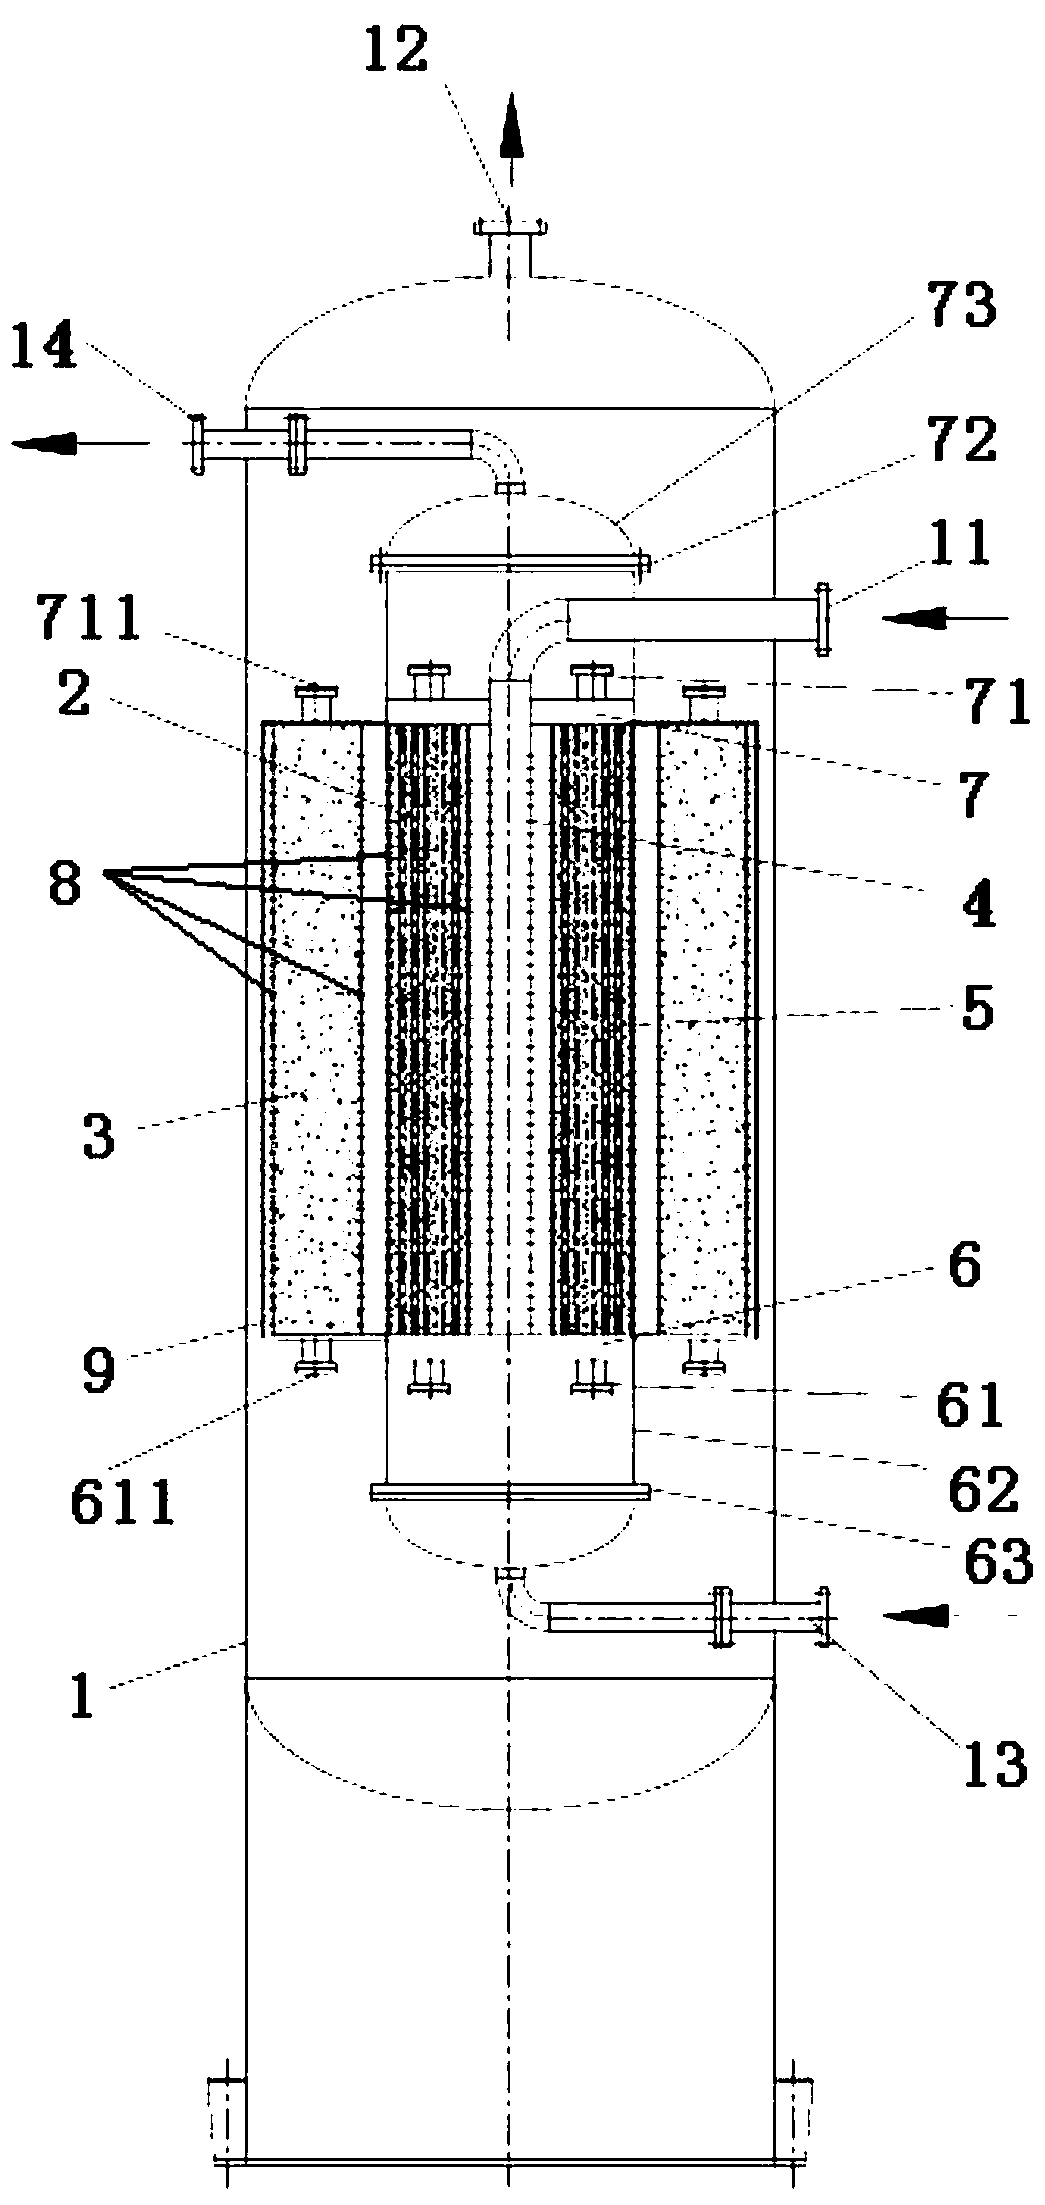 A combined fixed-bed reactor and the device formed therefrom